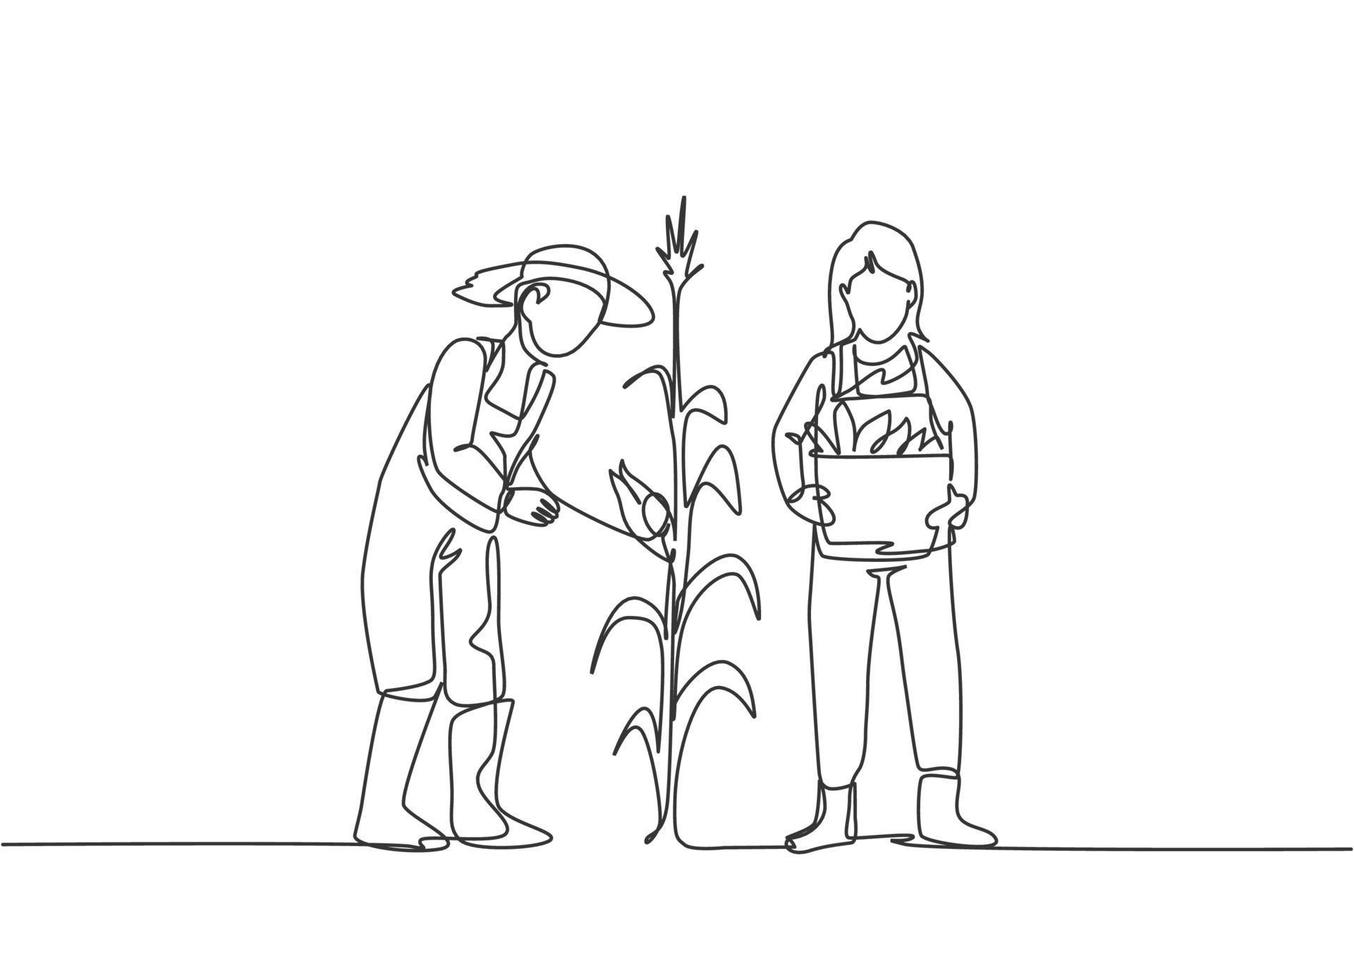 Single one line drawing of young couple farmer picking the corn on the tree and bring a basket. Farming challenge minimalist concept. Modern continuous line draw design graphic vector illustration.